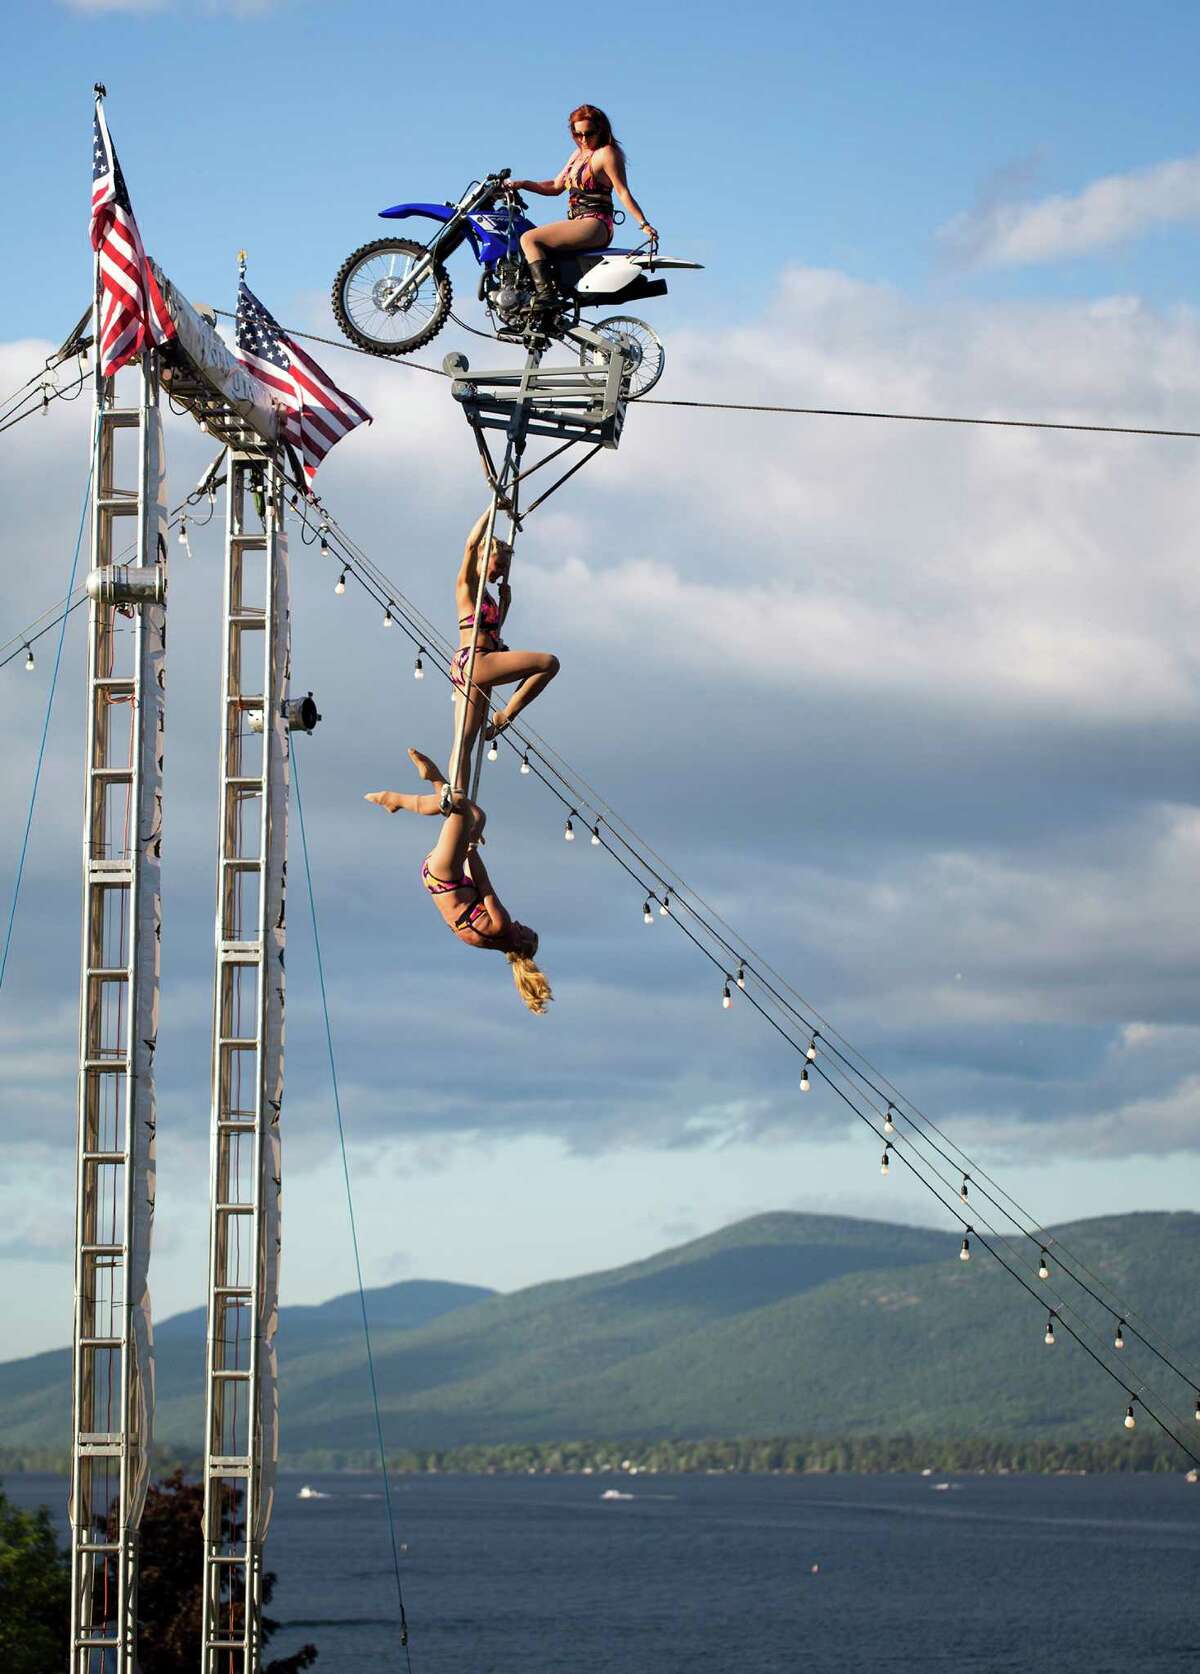 The Circus Una all women's group performs their motorcycle tightrope act during the Americade motorcycle rally in Lake George, N.Y. on Friday, June 6, 2014. 